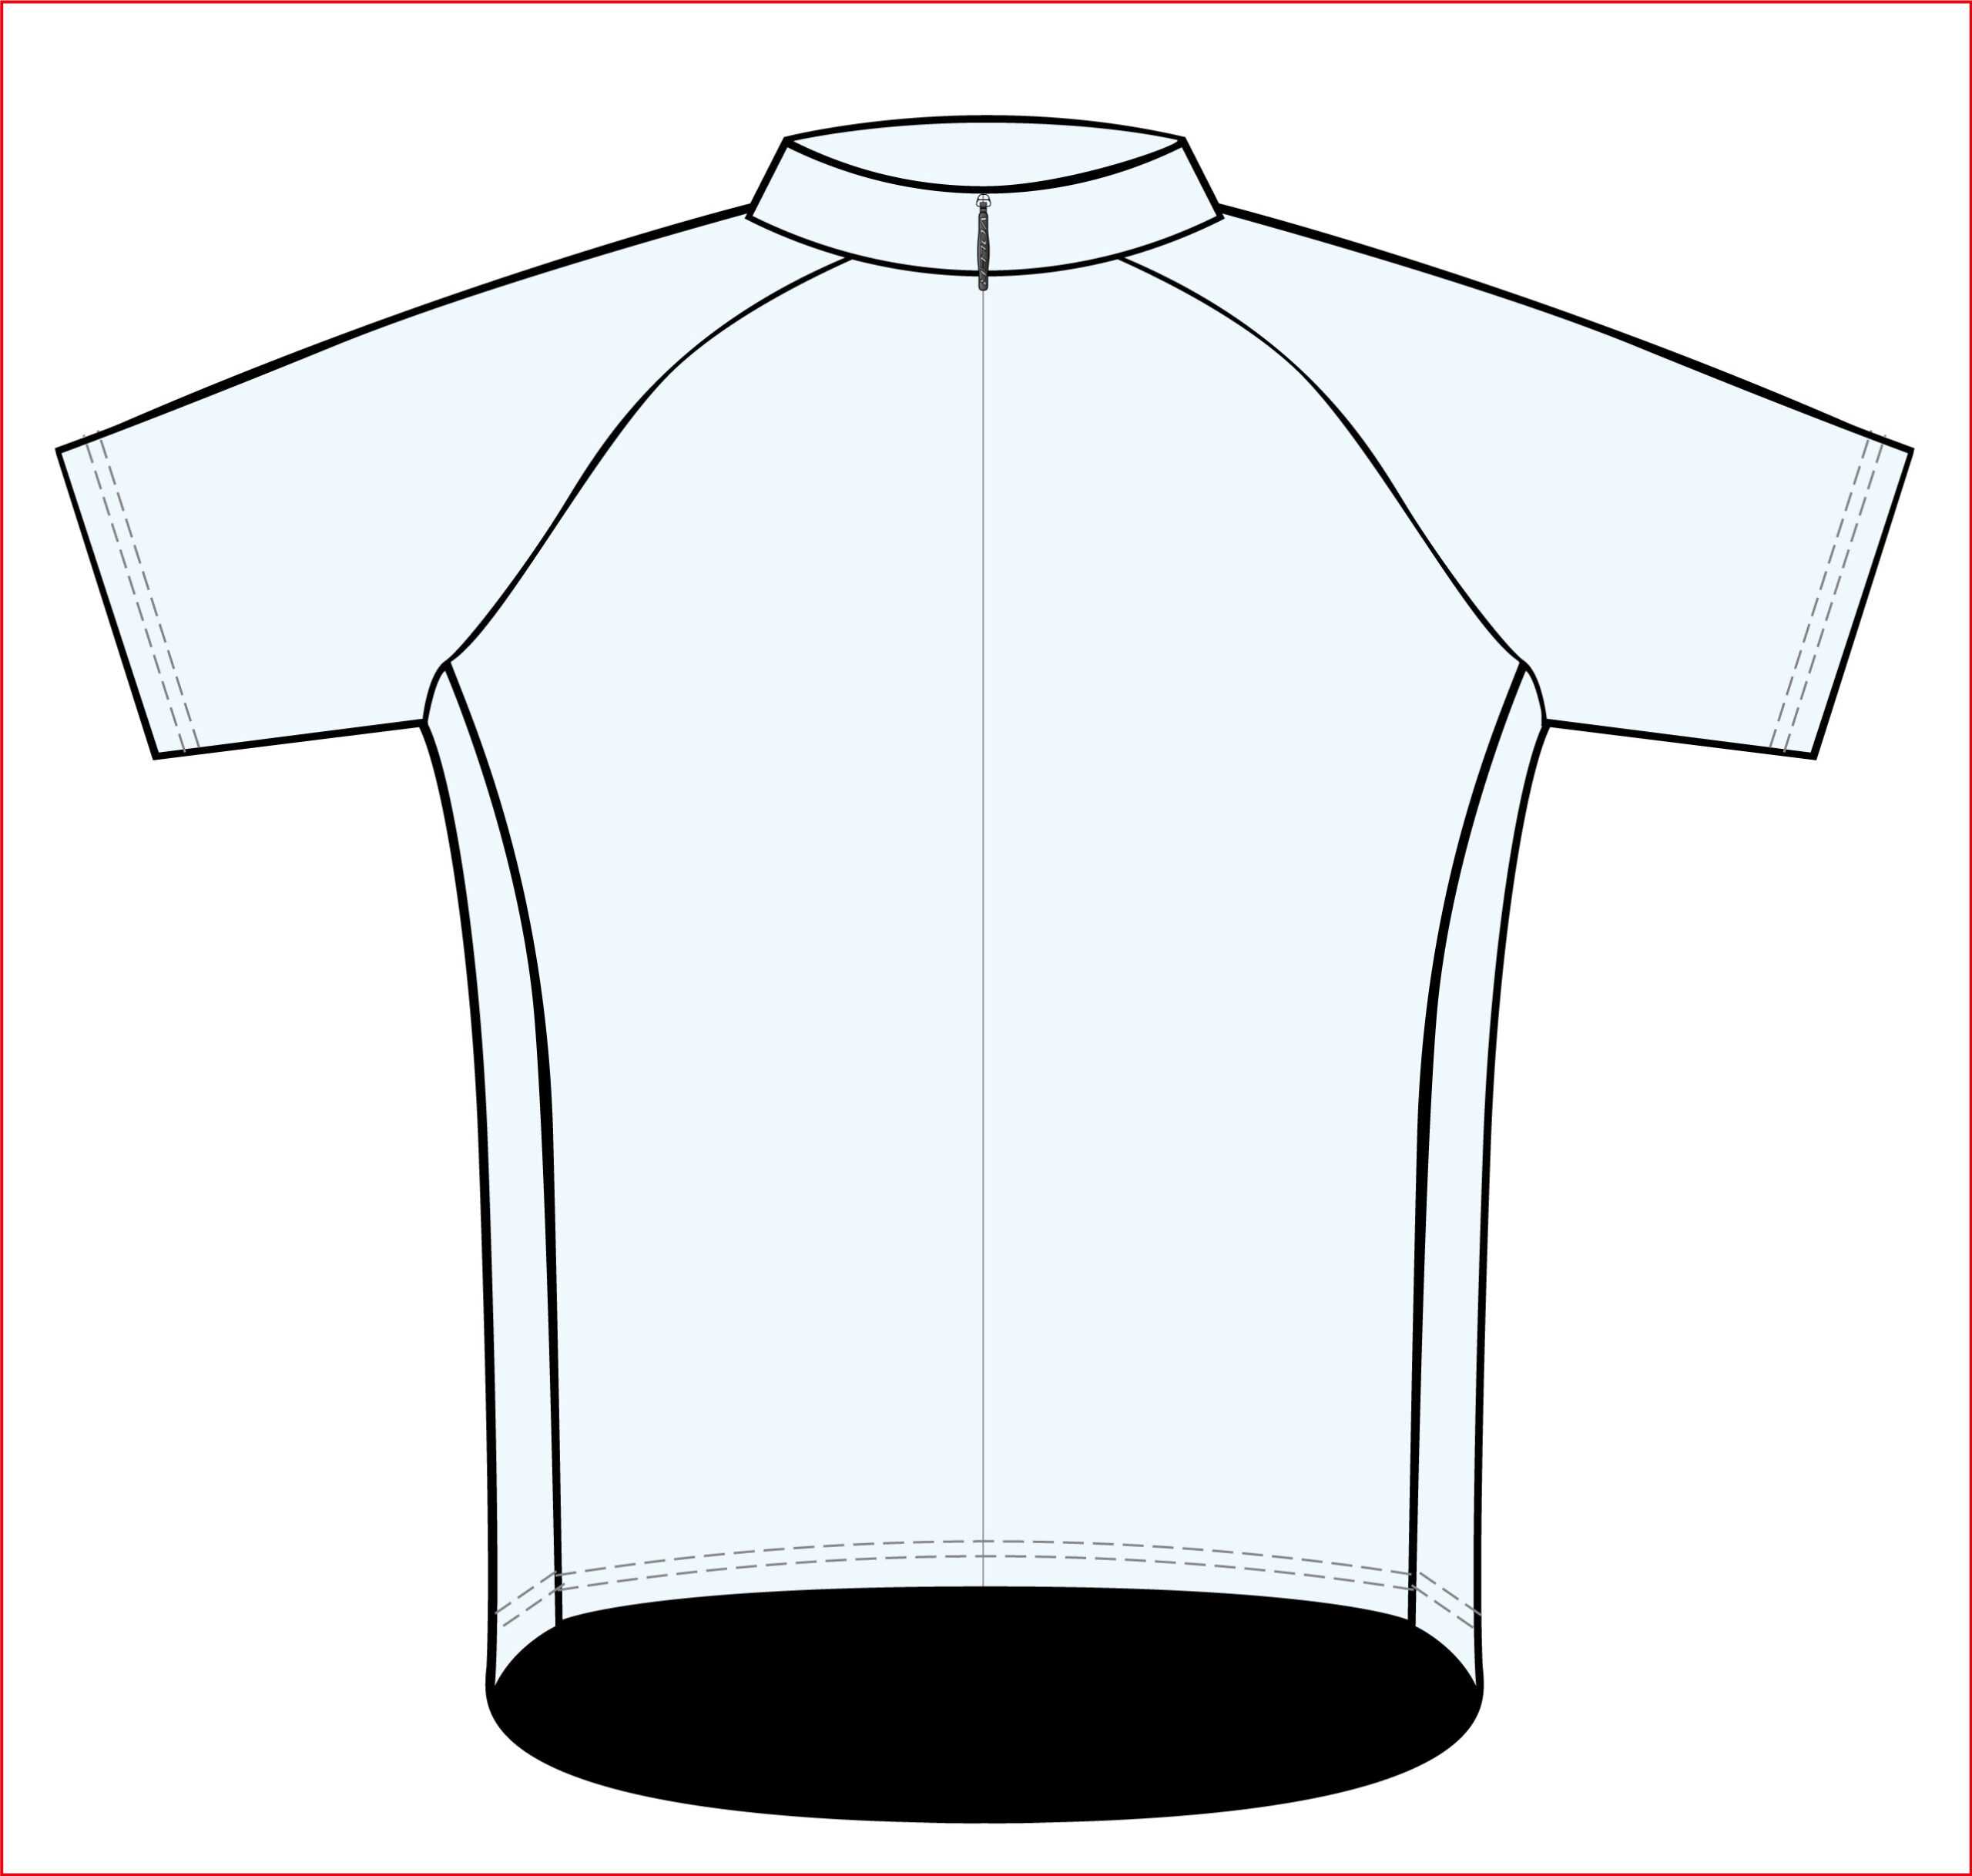 Free Jersey Template, Download Free Clip Art, Free Clip Art Regarding Blank Cycling Jersey Template